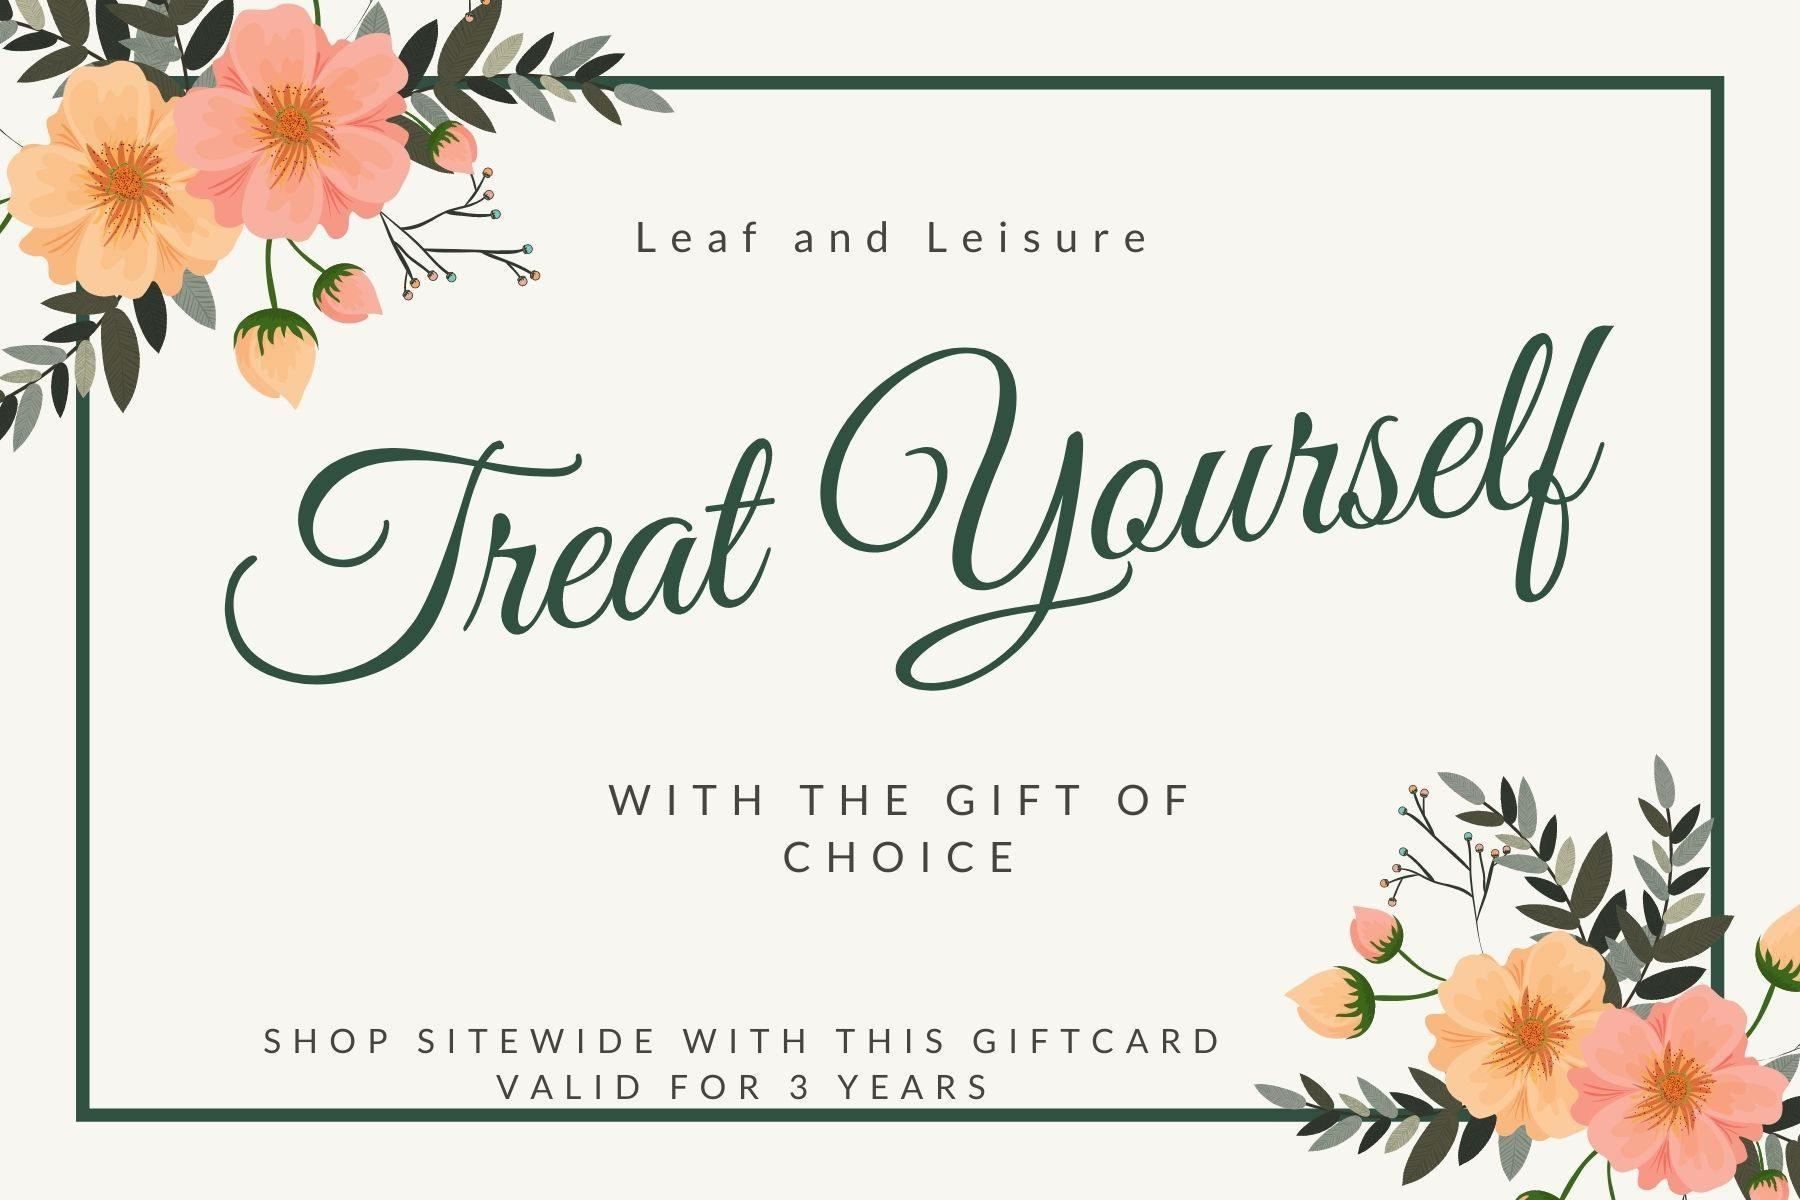 Leaf and Leisure Gift Card - Leaf and Leisure